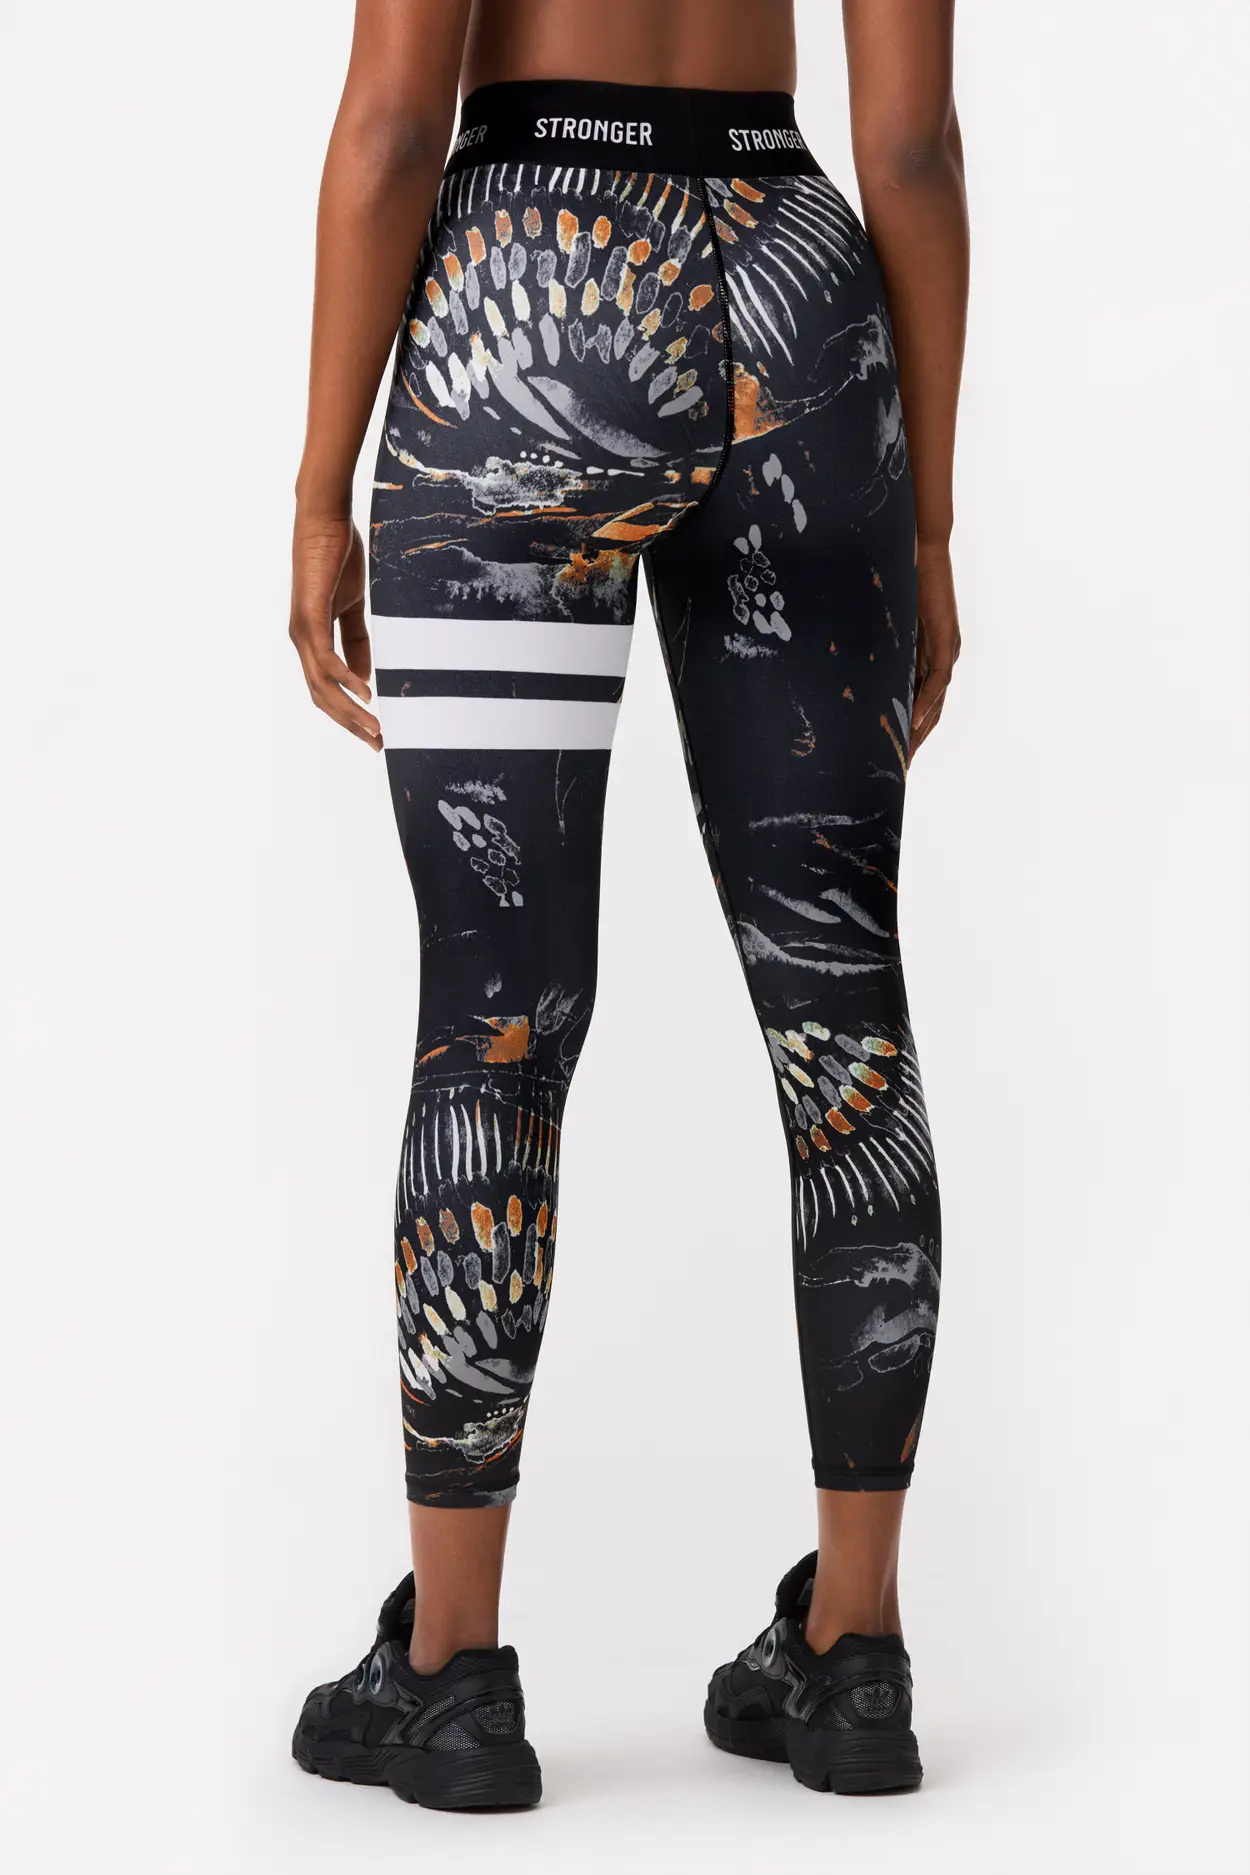 Voodoo Glitch Performance - Extra High Waisted Leggings - L (AUS 14-16)